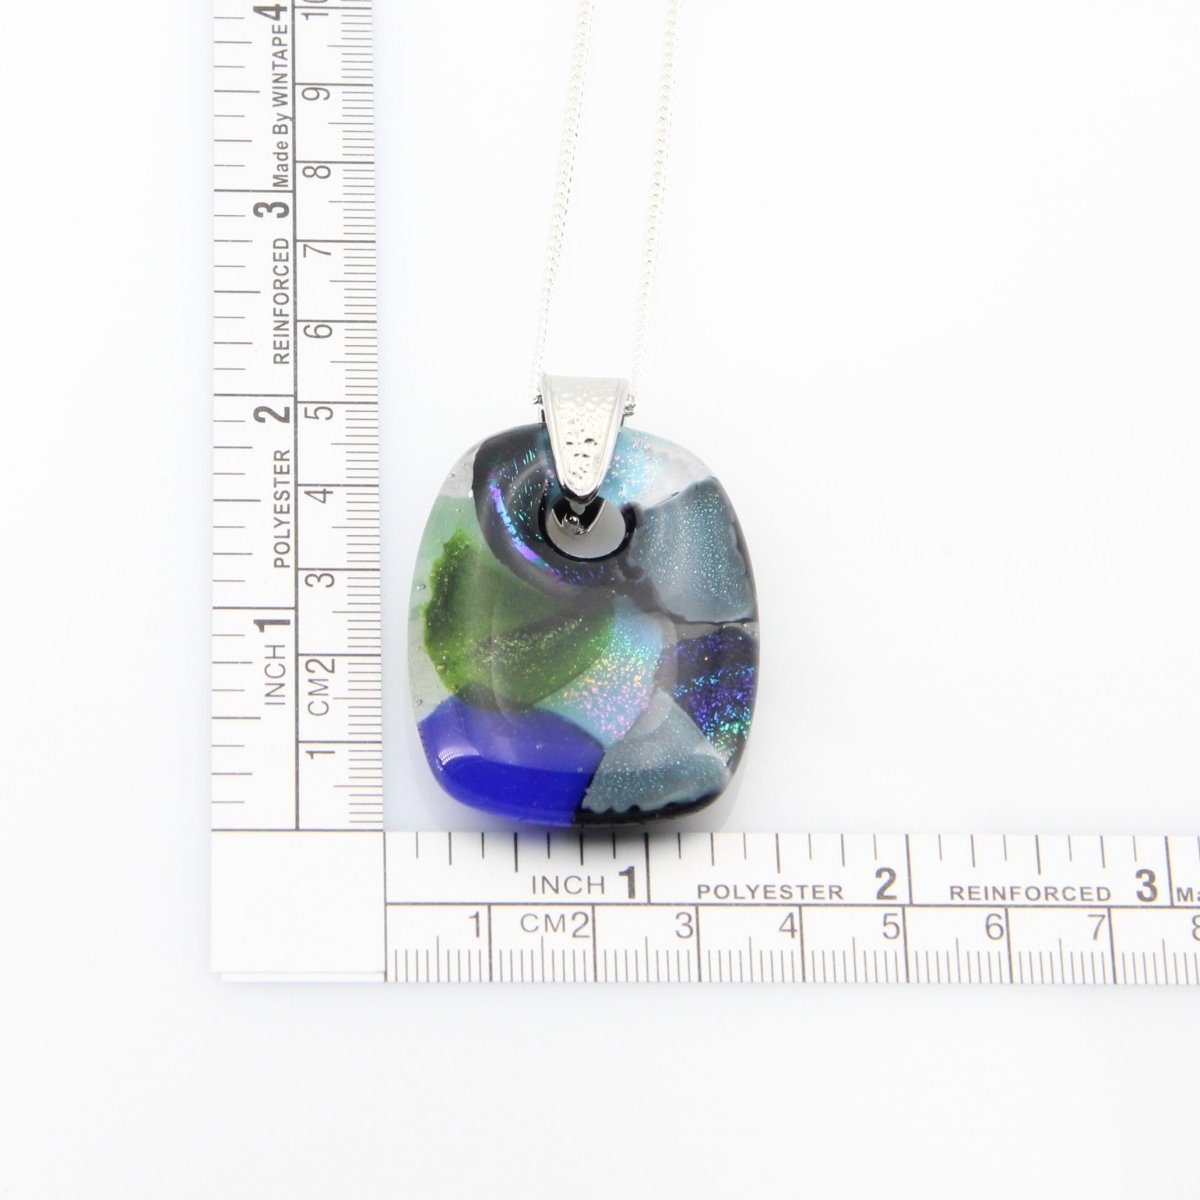 Green and Blue Dichroic Glass Pendant